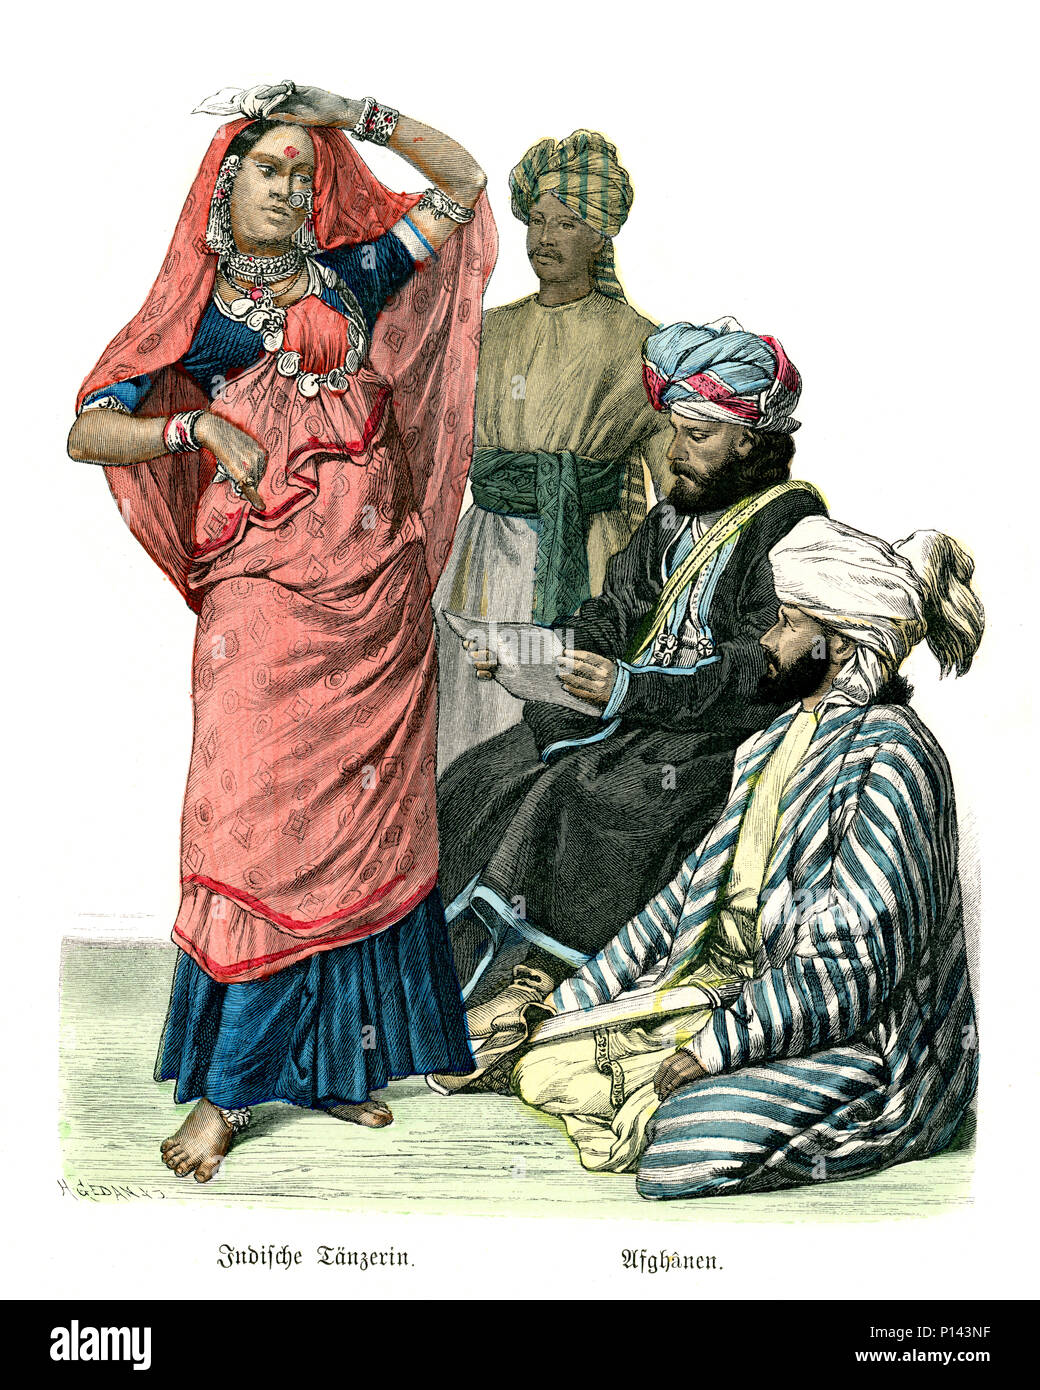 Vintage engraving of History of Fashion, Indian Dancer and Afgan men 19th Century Stock Photo